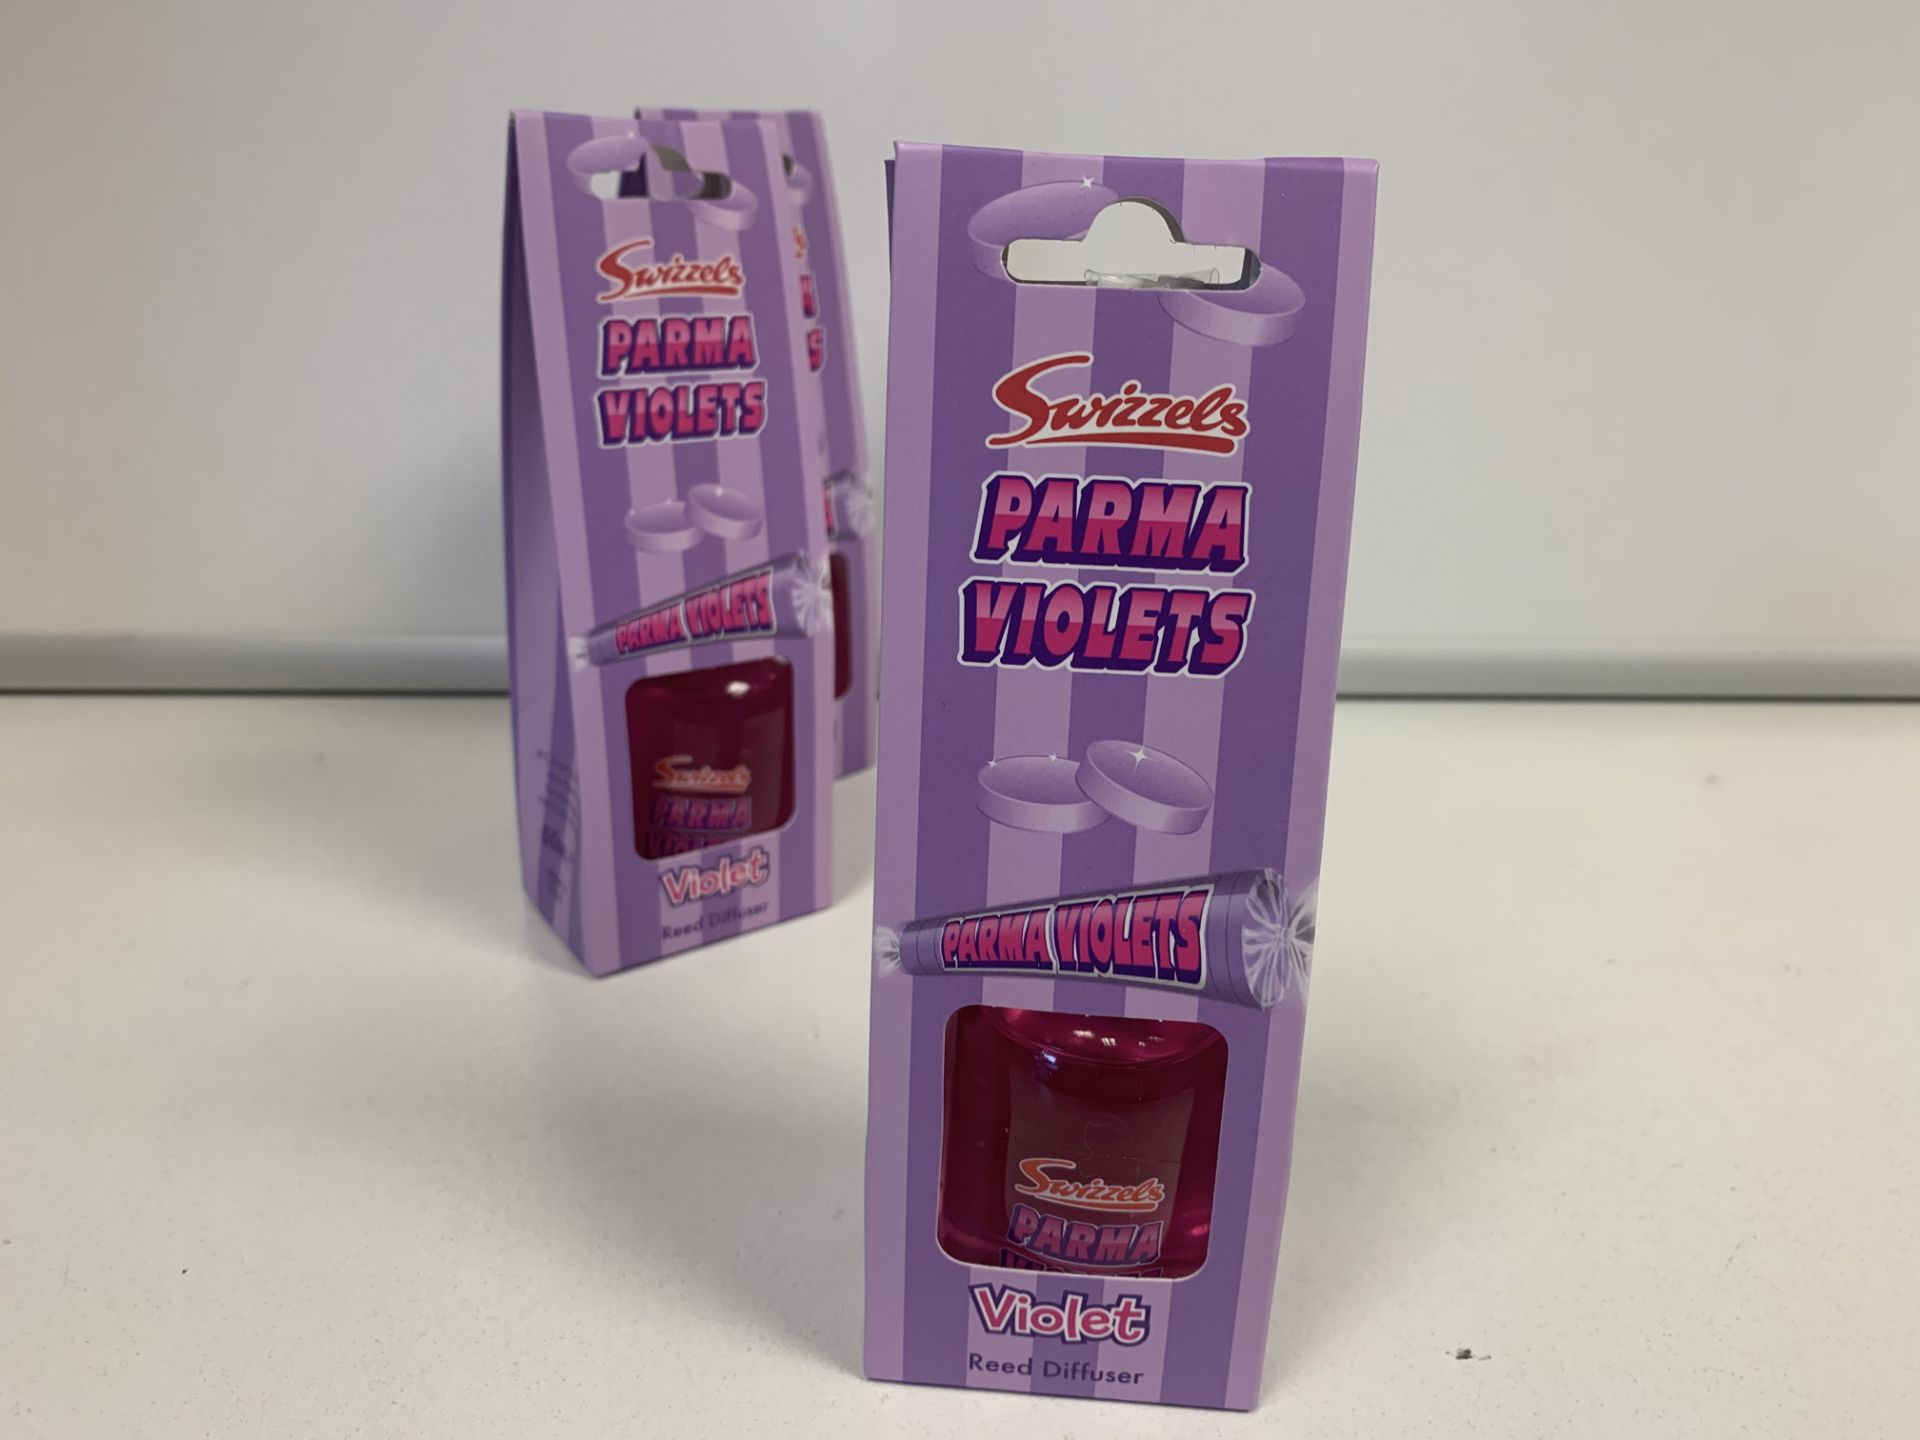 24 X BRAND NEW SWIZZELS PARMA VIOLET REED DIFUSERS - Image 2 of 2